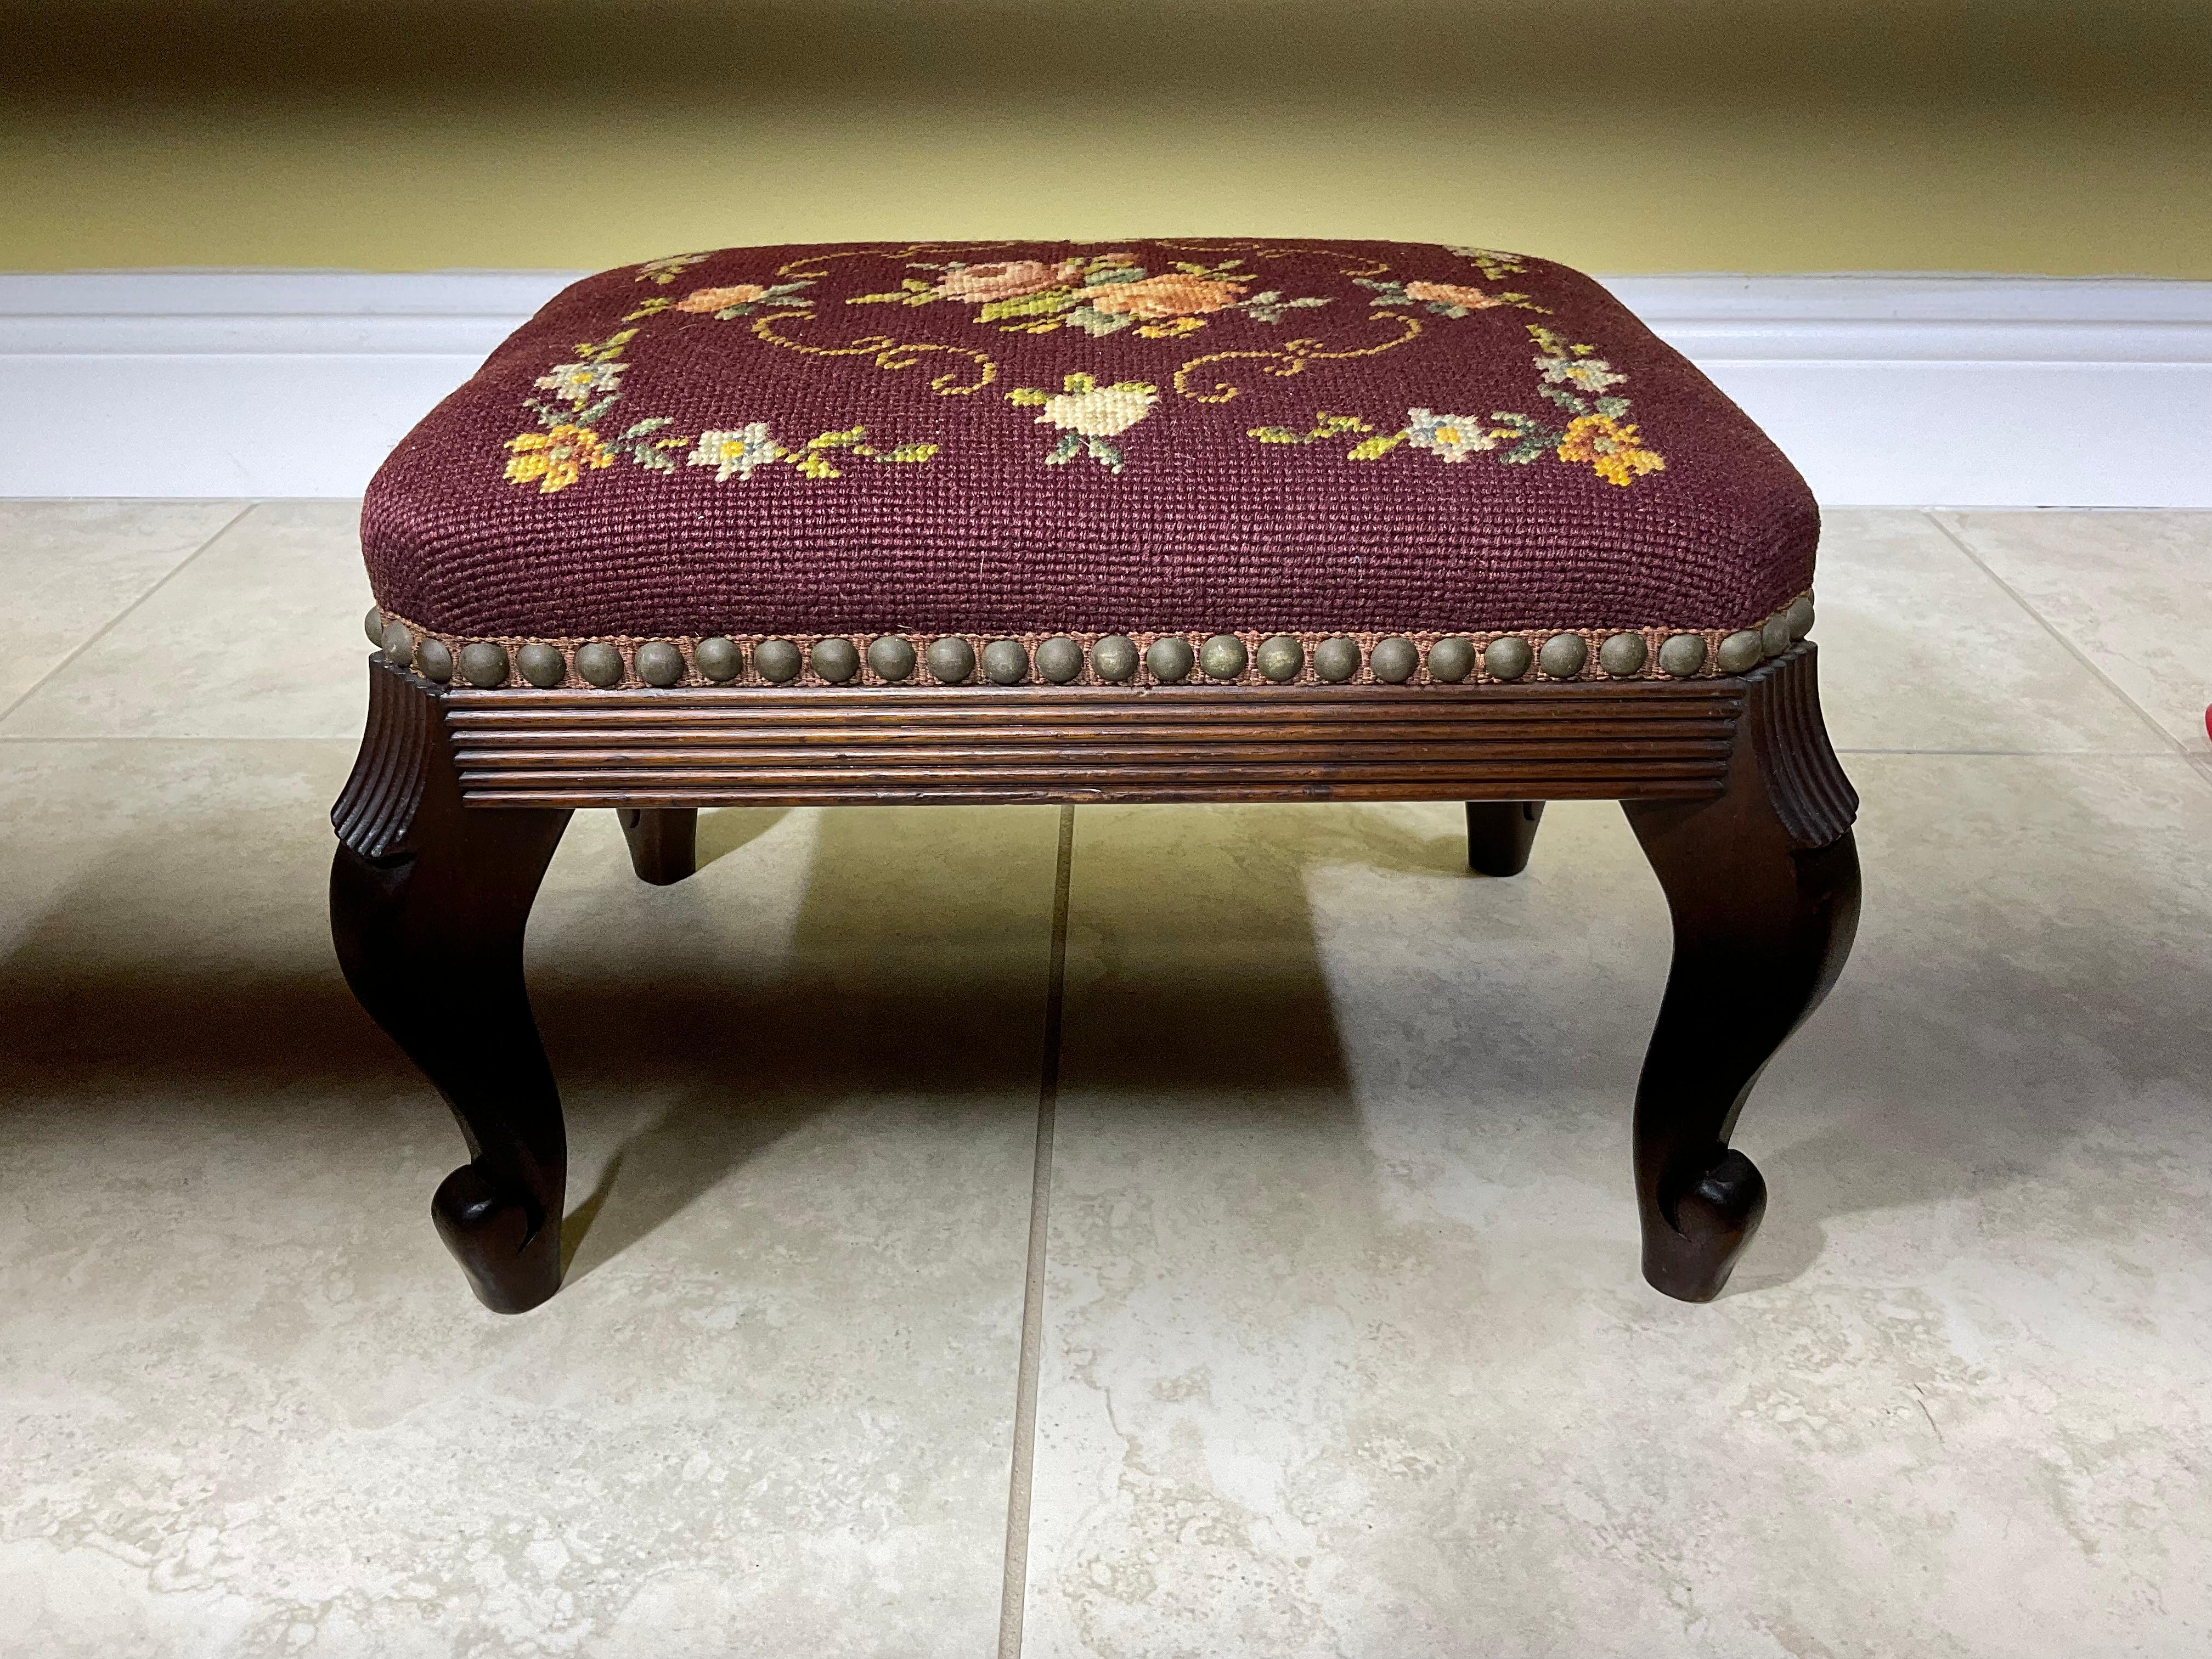 Petite Elegant foot stool made hand carved woof wood, upholstered with beautiful floral motif needlepoint textile.
Great decorative object of art for any room.